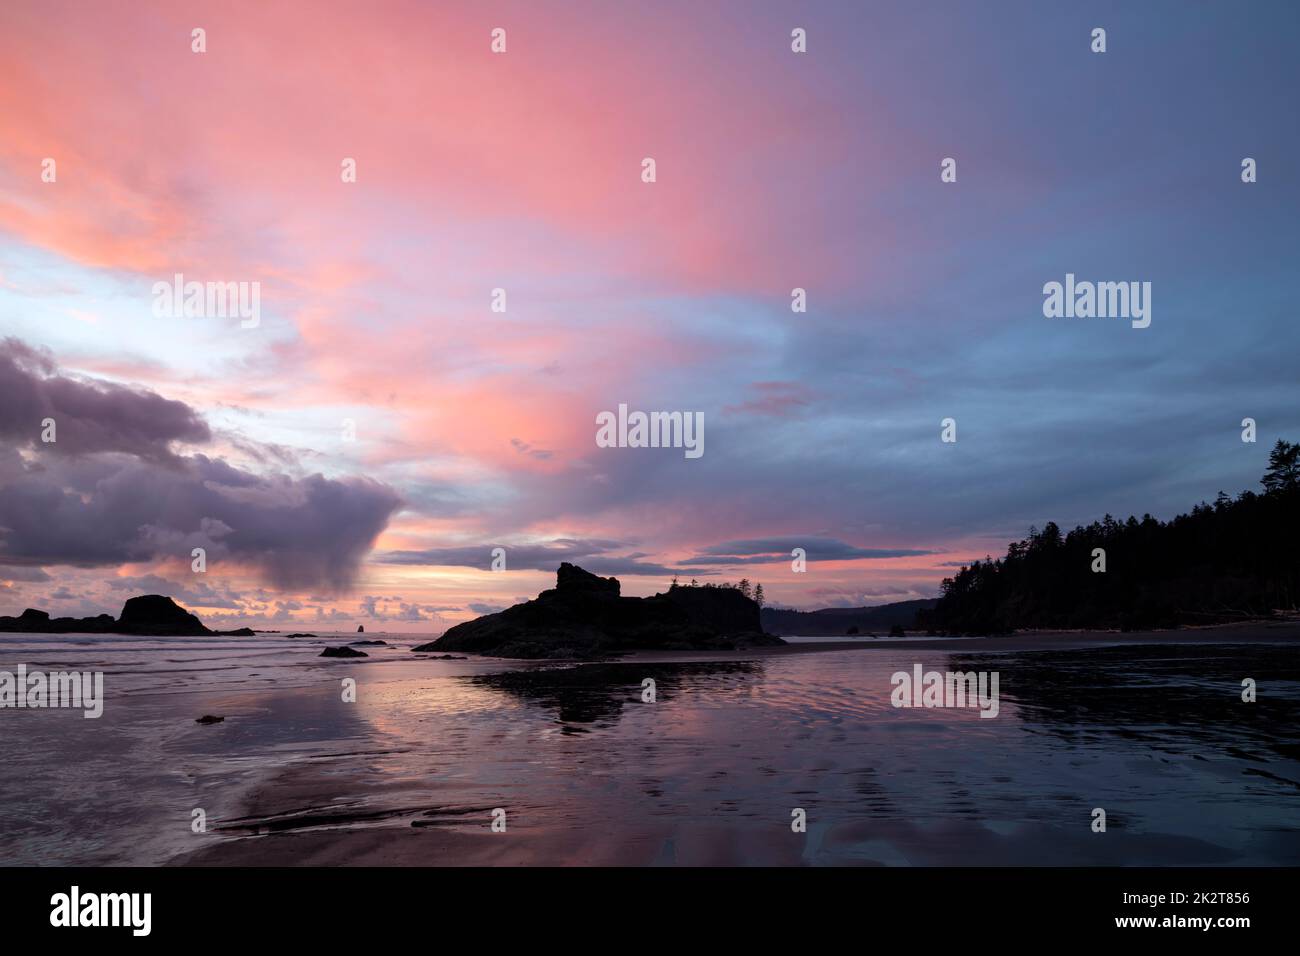 WA22056-00...WASINGTON - Dusk at Ruby Beach on the Pacific Coast in Olympic National Park. Stock Photo